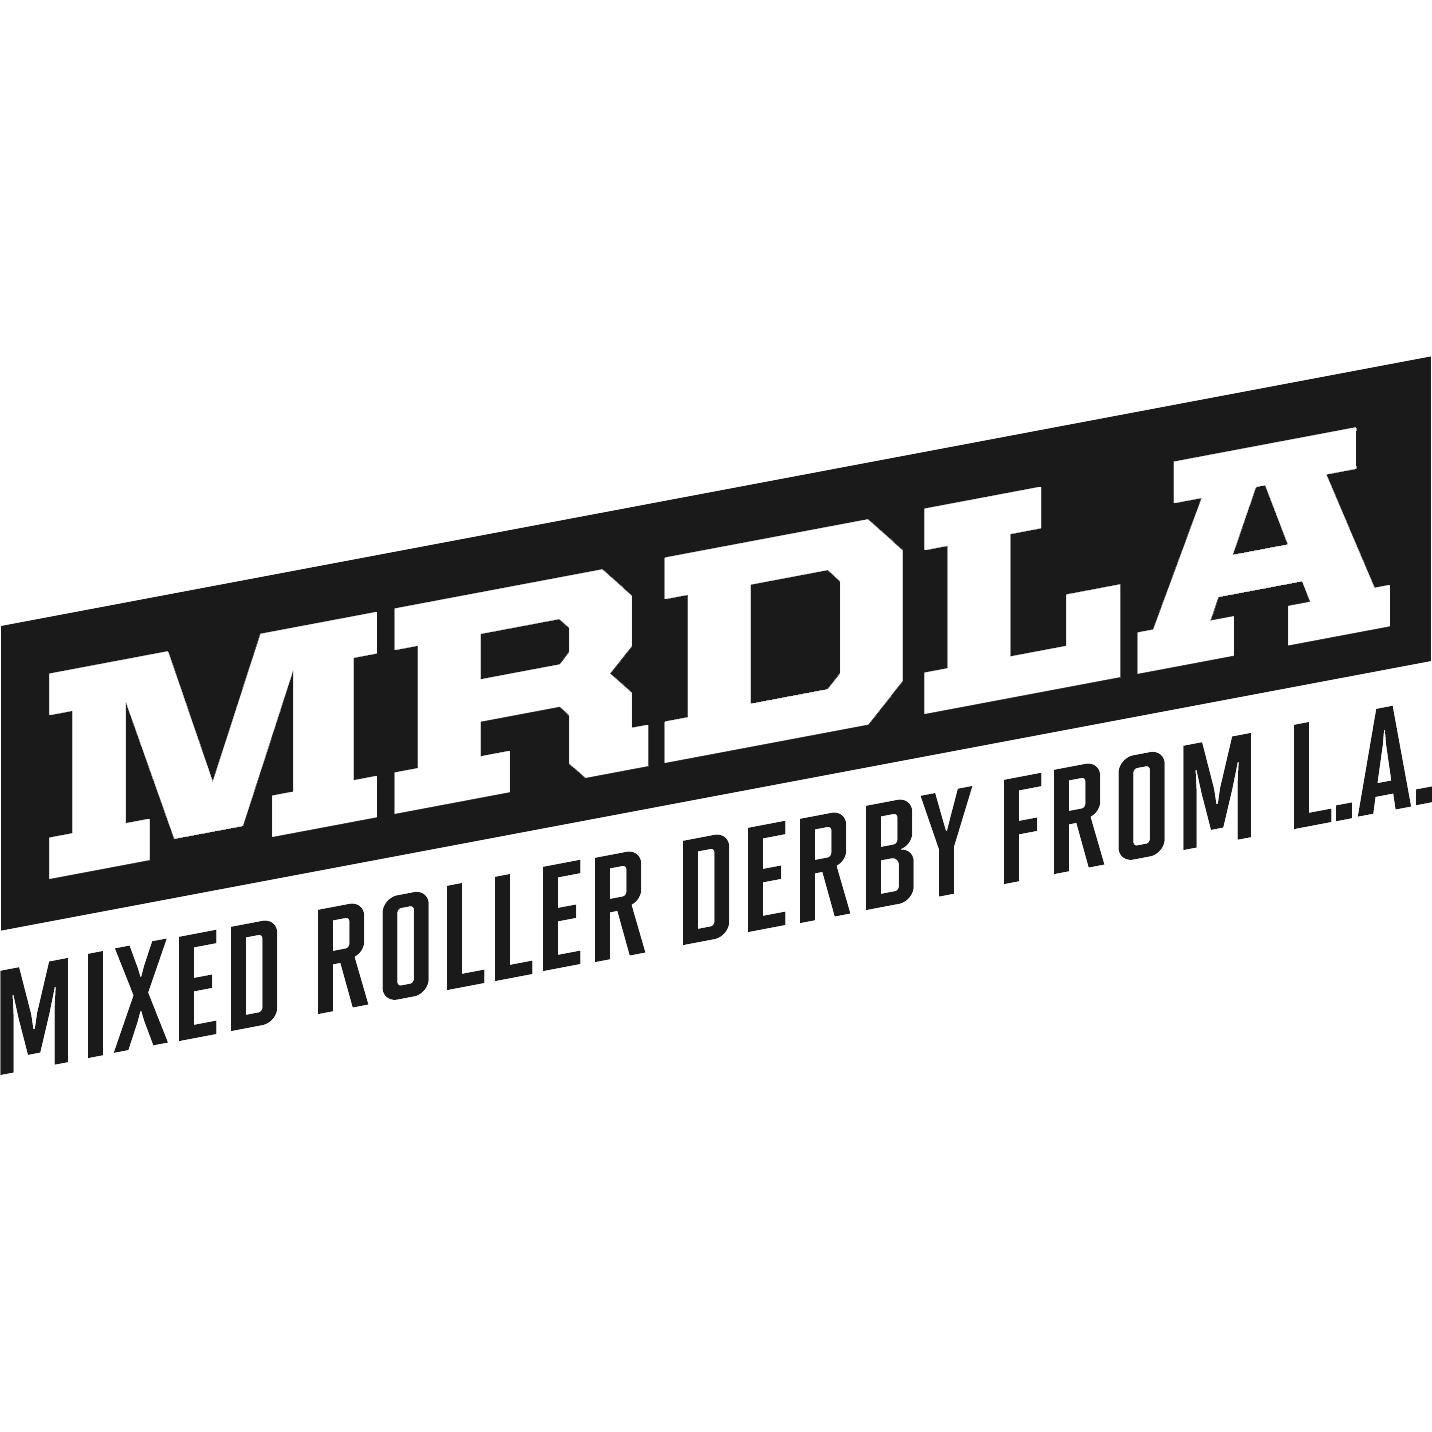 Mixed Roller Derby from Loire Atlantique